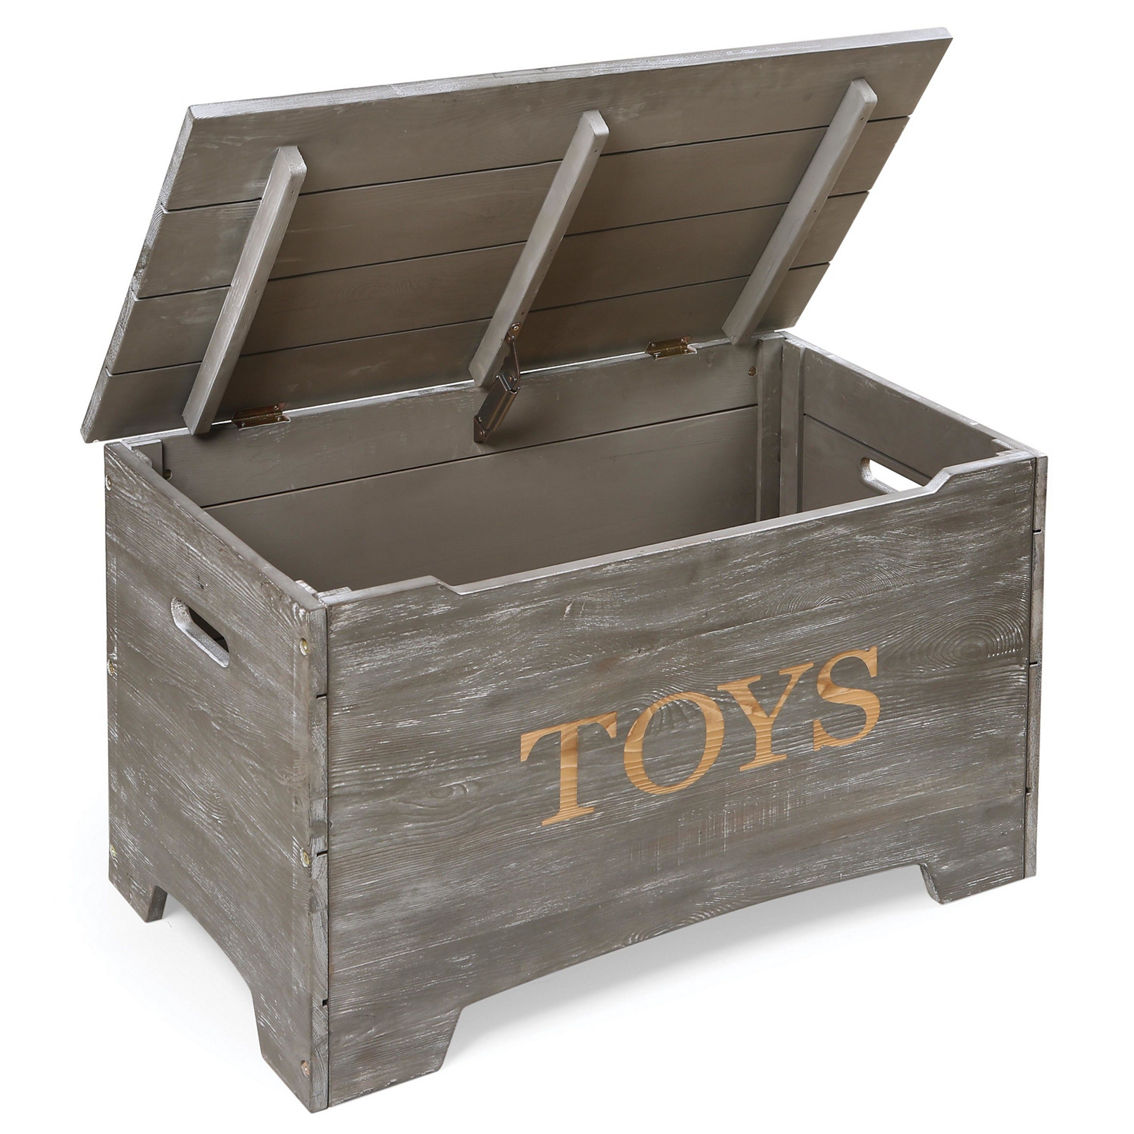 Badger Basket Solid Wood Rustic Toy Box - Image 5 of 5